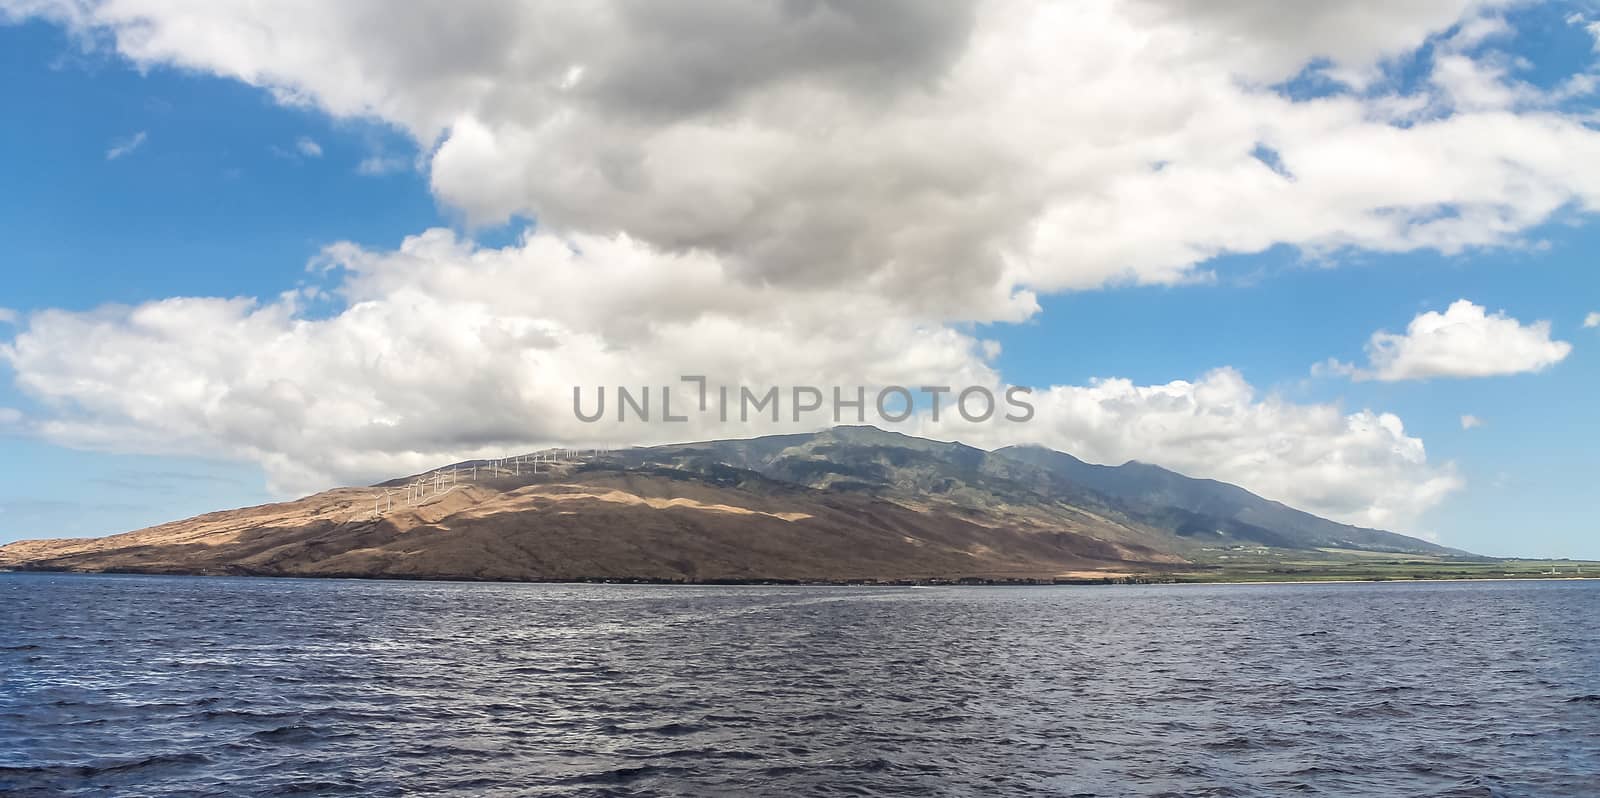 Panorama of the island Maui in Hawaii seen from the ocean